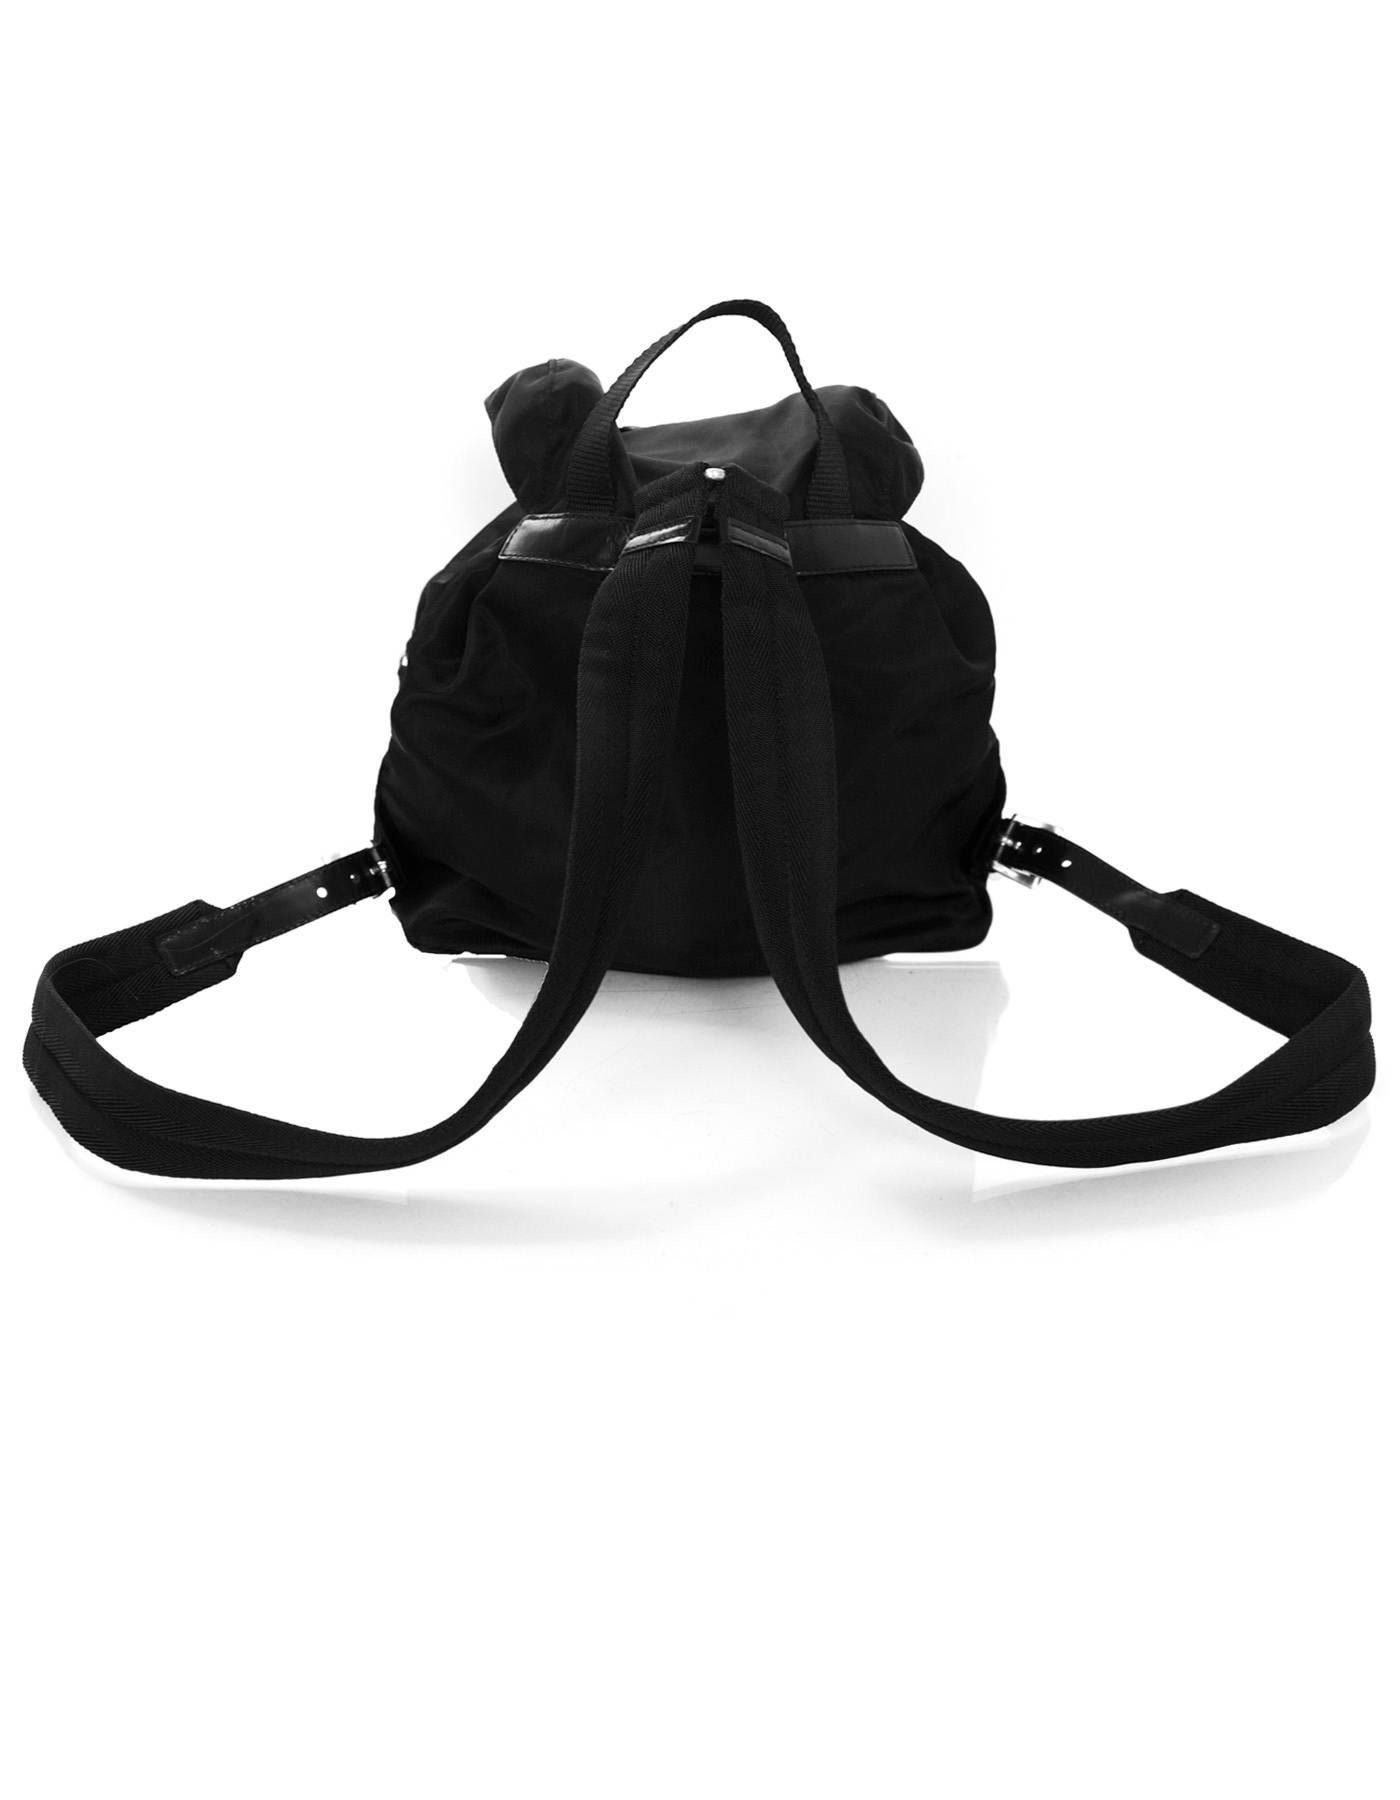 Prada Black Tessuto Backpack

Made In: Italy
Color: Black
Hardware: Silver
Materials: Tessuto nylon
Lining: Black textile
Closure/Opening: Drawstring with flap top and buckle closure
Exterior Pockets: Two front pockets
Interior Pockets: One zip